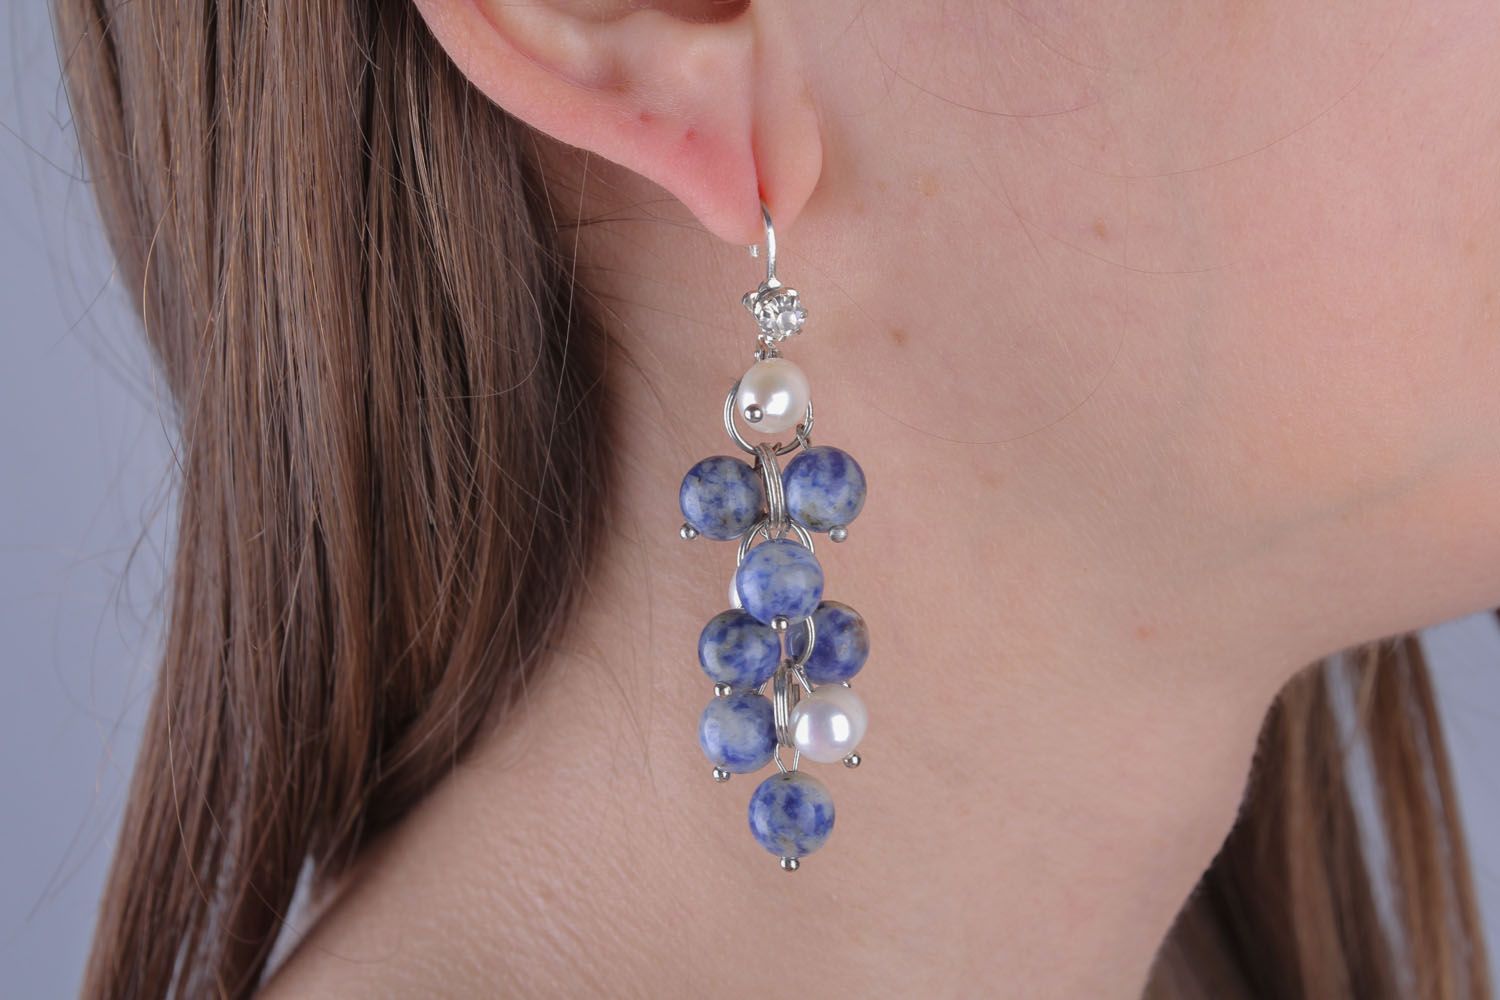 Earrings with natural stone charms photo 4